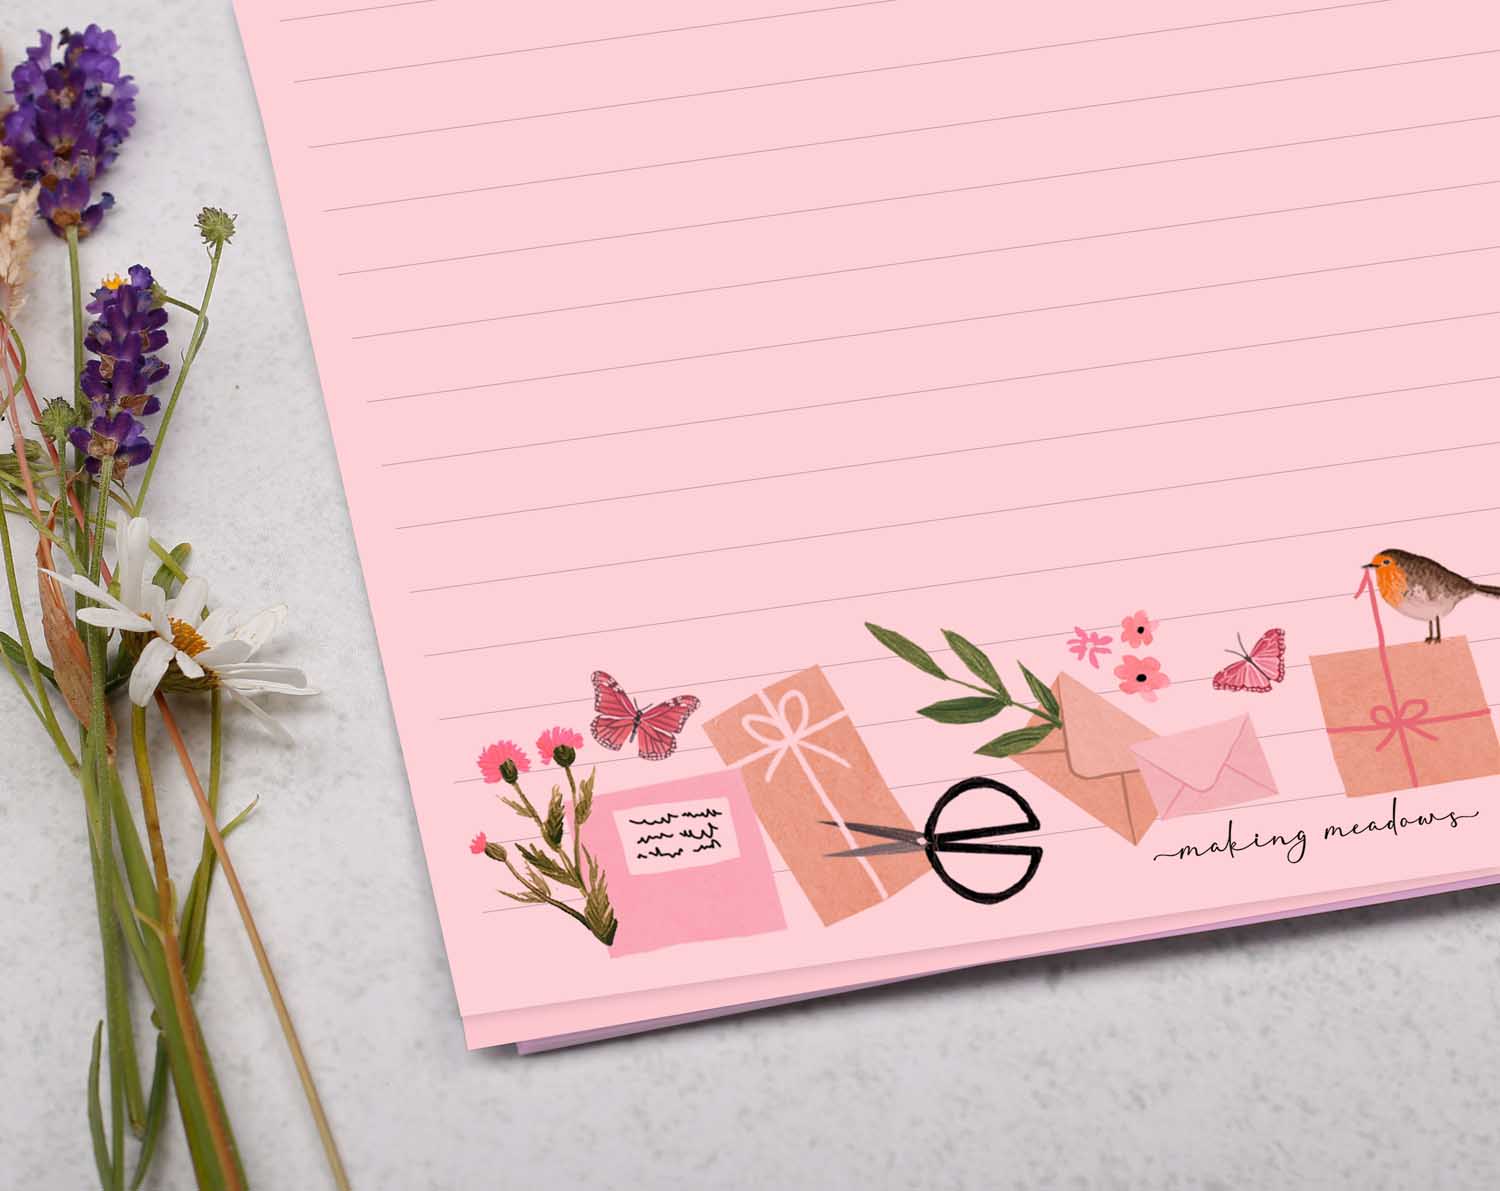 Pink A4 Letter Writing Paper Sheets with Pink Flowers With Cute bird and butterfly watercolour border design.